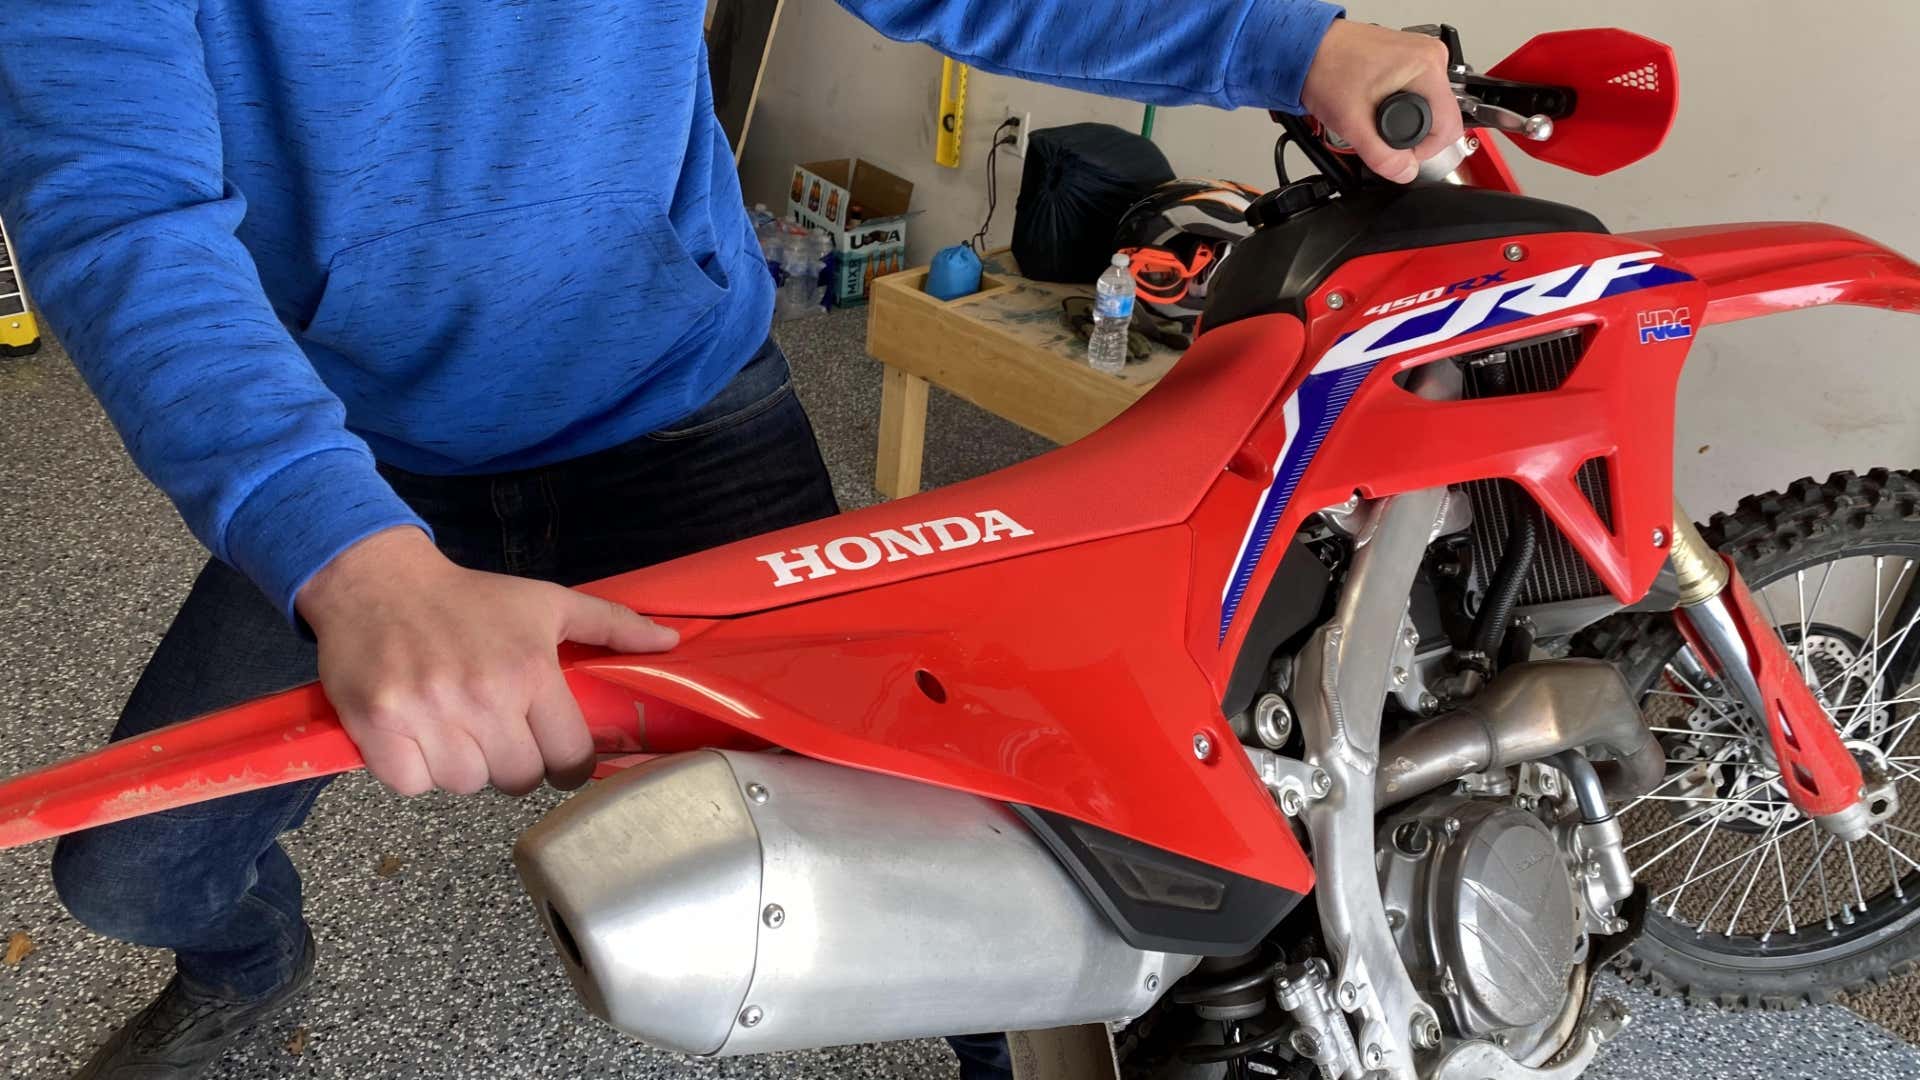 The author's hands on the handlebar and rear fender of the CRF450RX.